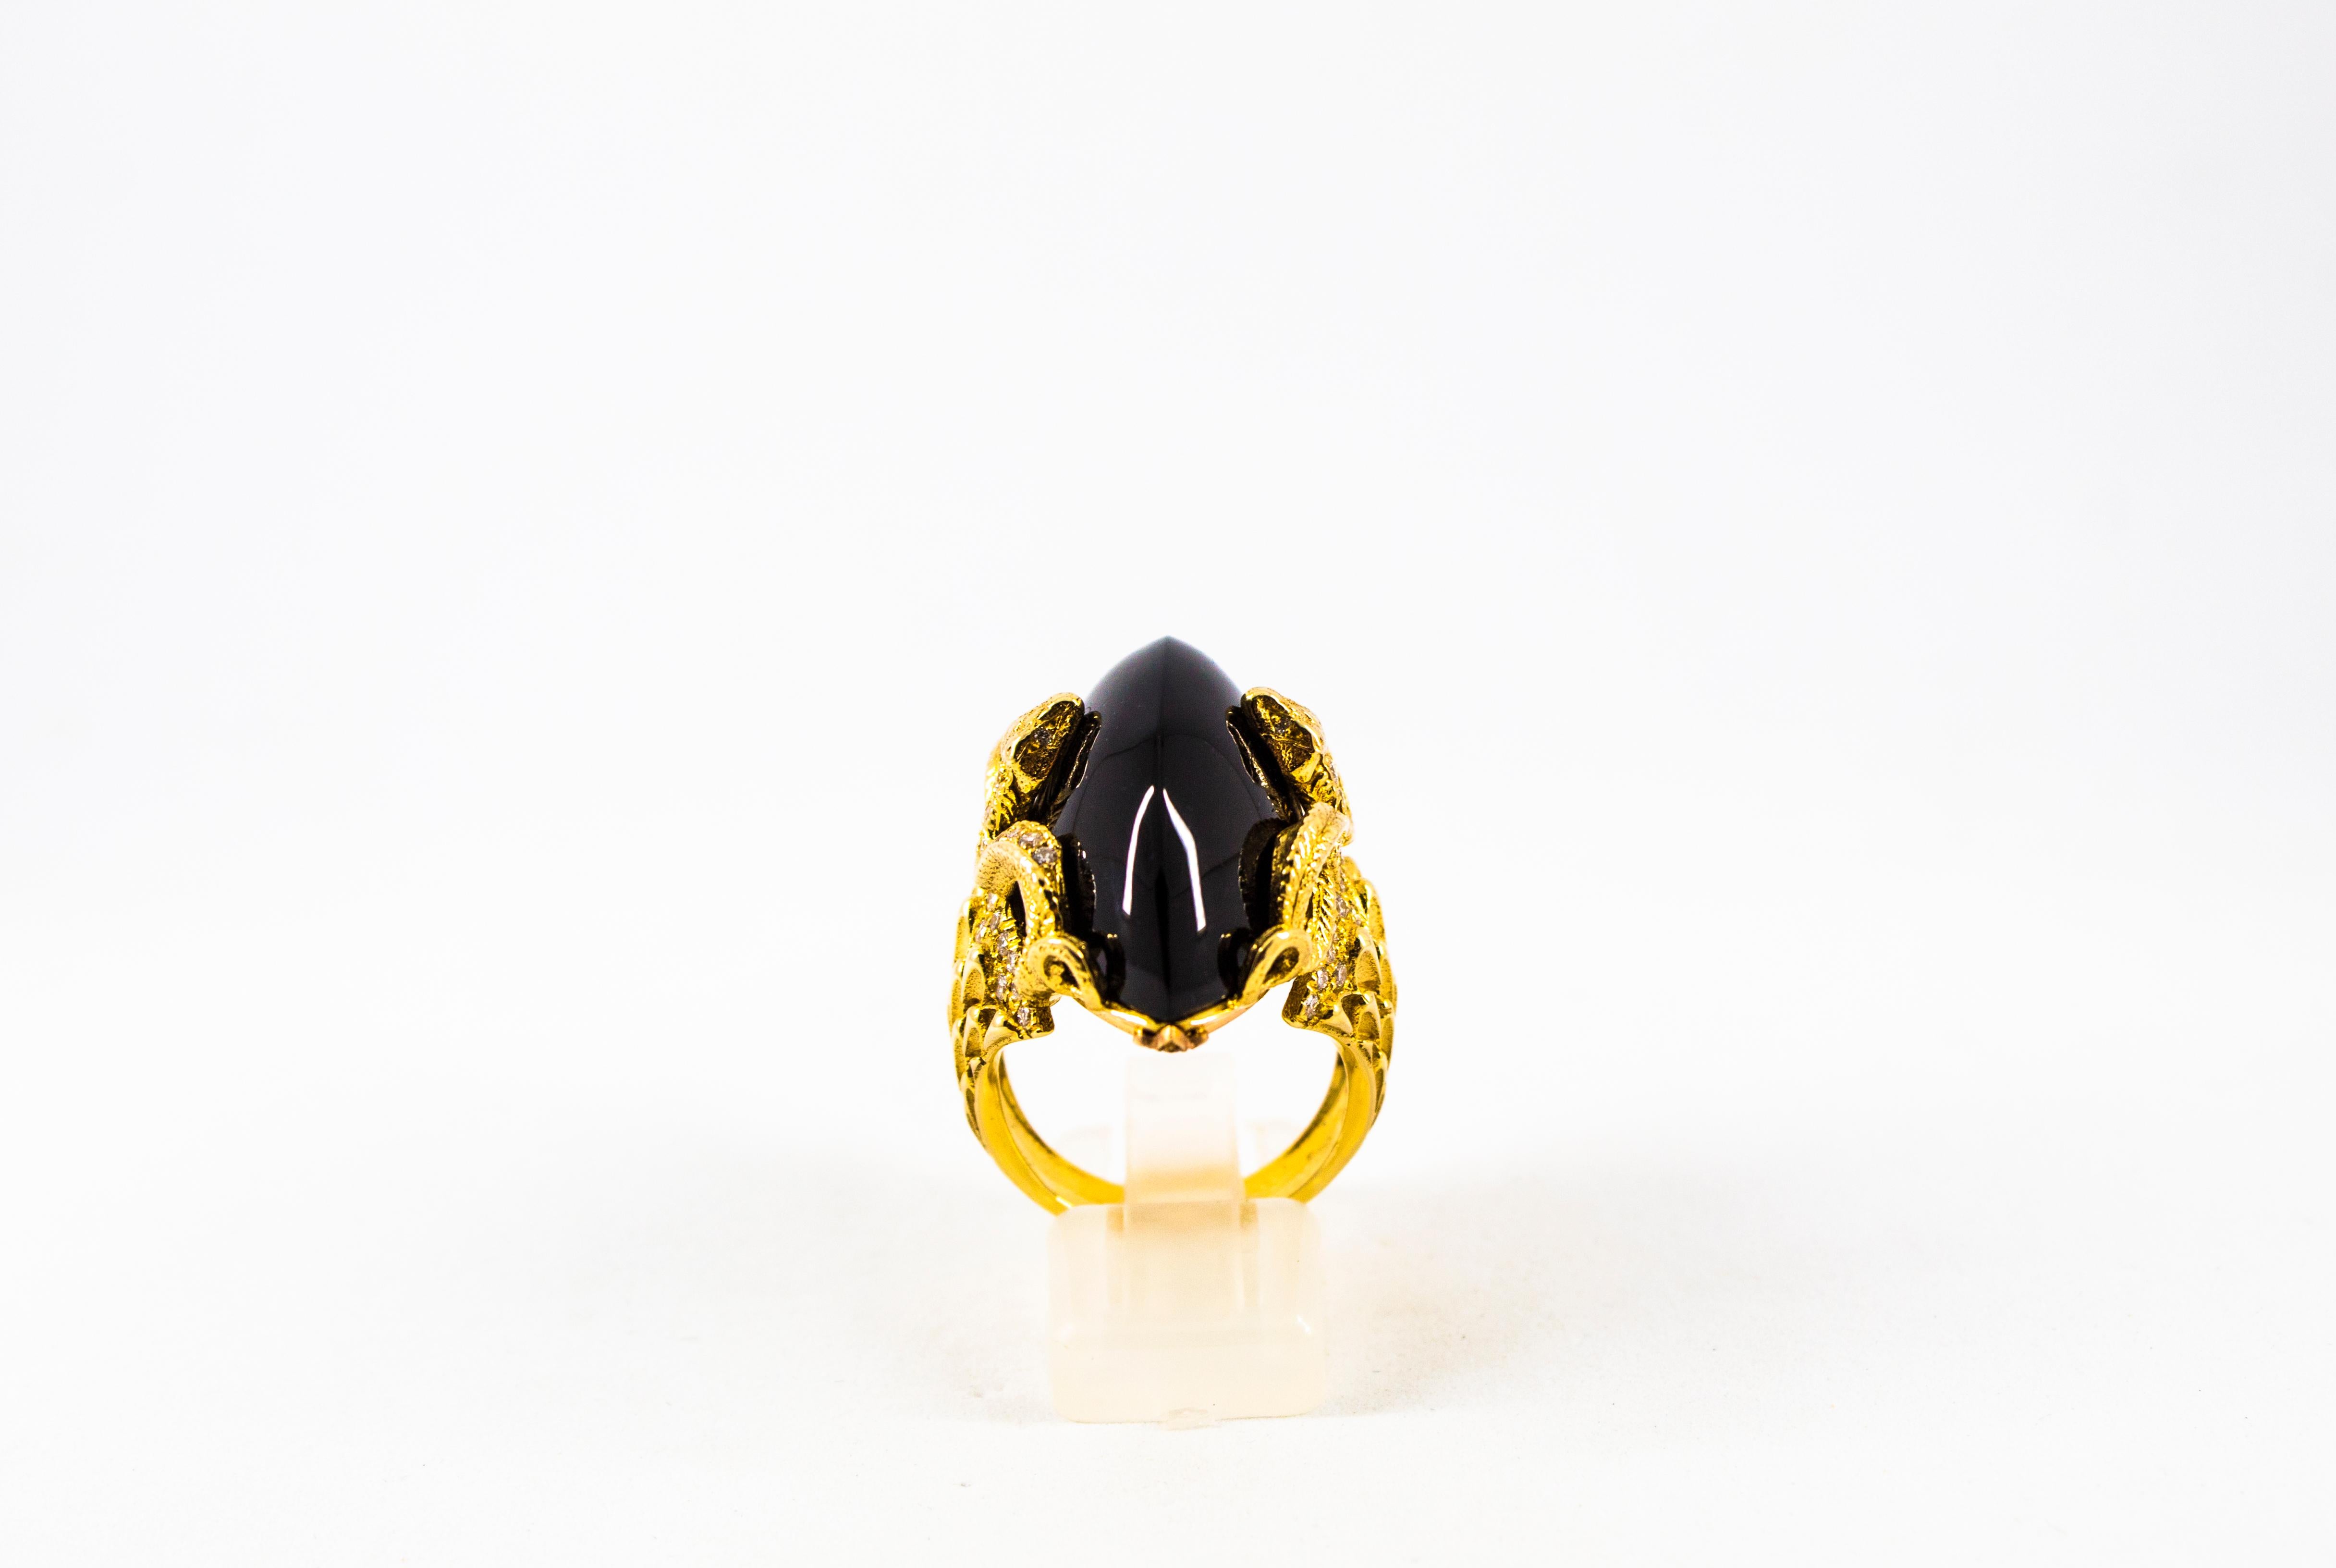 This Ring is made of 18K Yellow Gold.
This Ring is available also in White Gold or in 14K Yellow (Or White) Gold.
This Ring has 0.76 Carats of White Modern Round Cut Diamonds.
This Ring has a 36.25 Carats Onyx.
Size ITA: 17 1/2 USA: 8 1/4
We're a